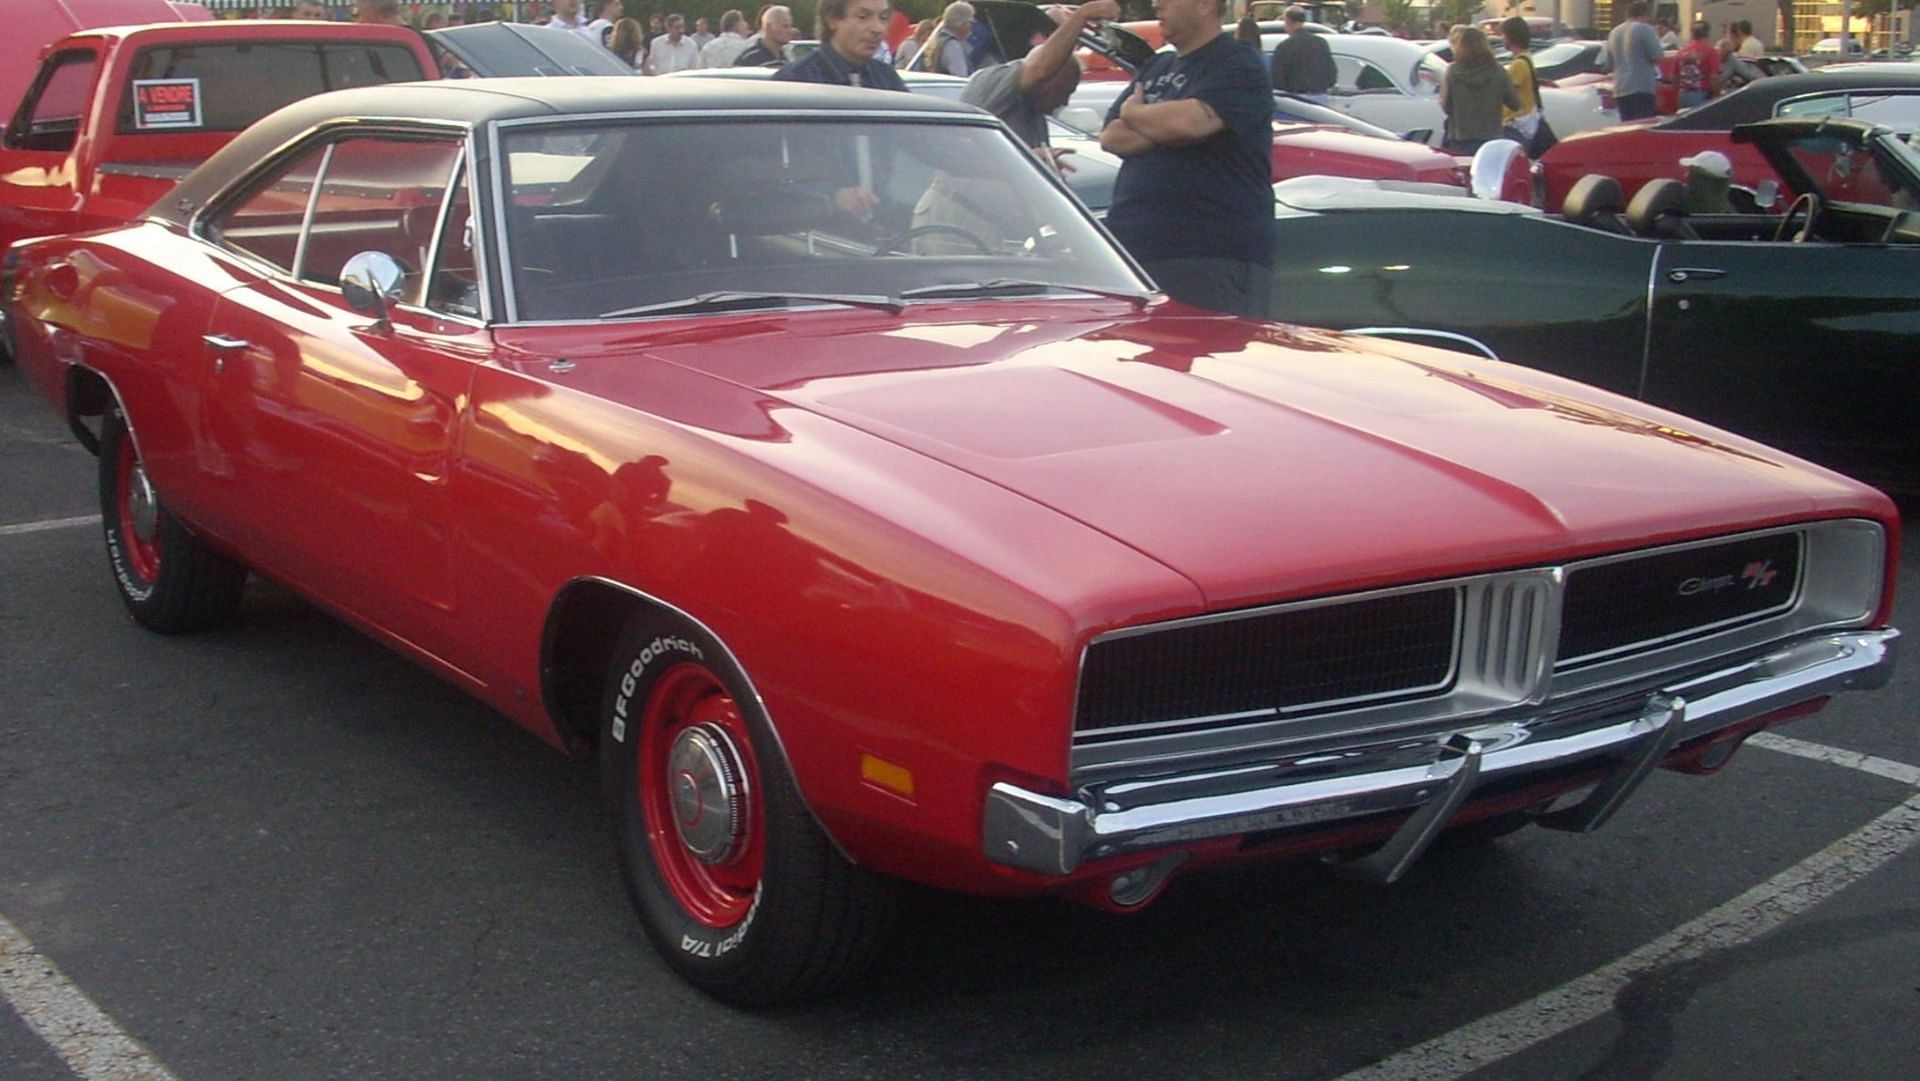 A look at the Dodge Challenger R/T 1969 in real life (Image via Wikipedia)